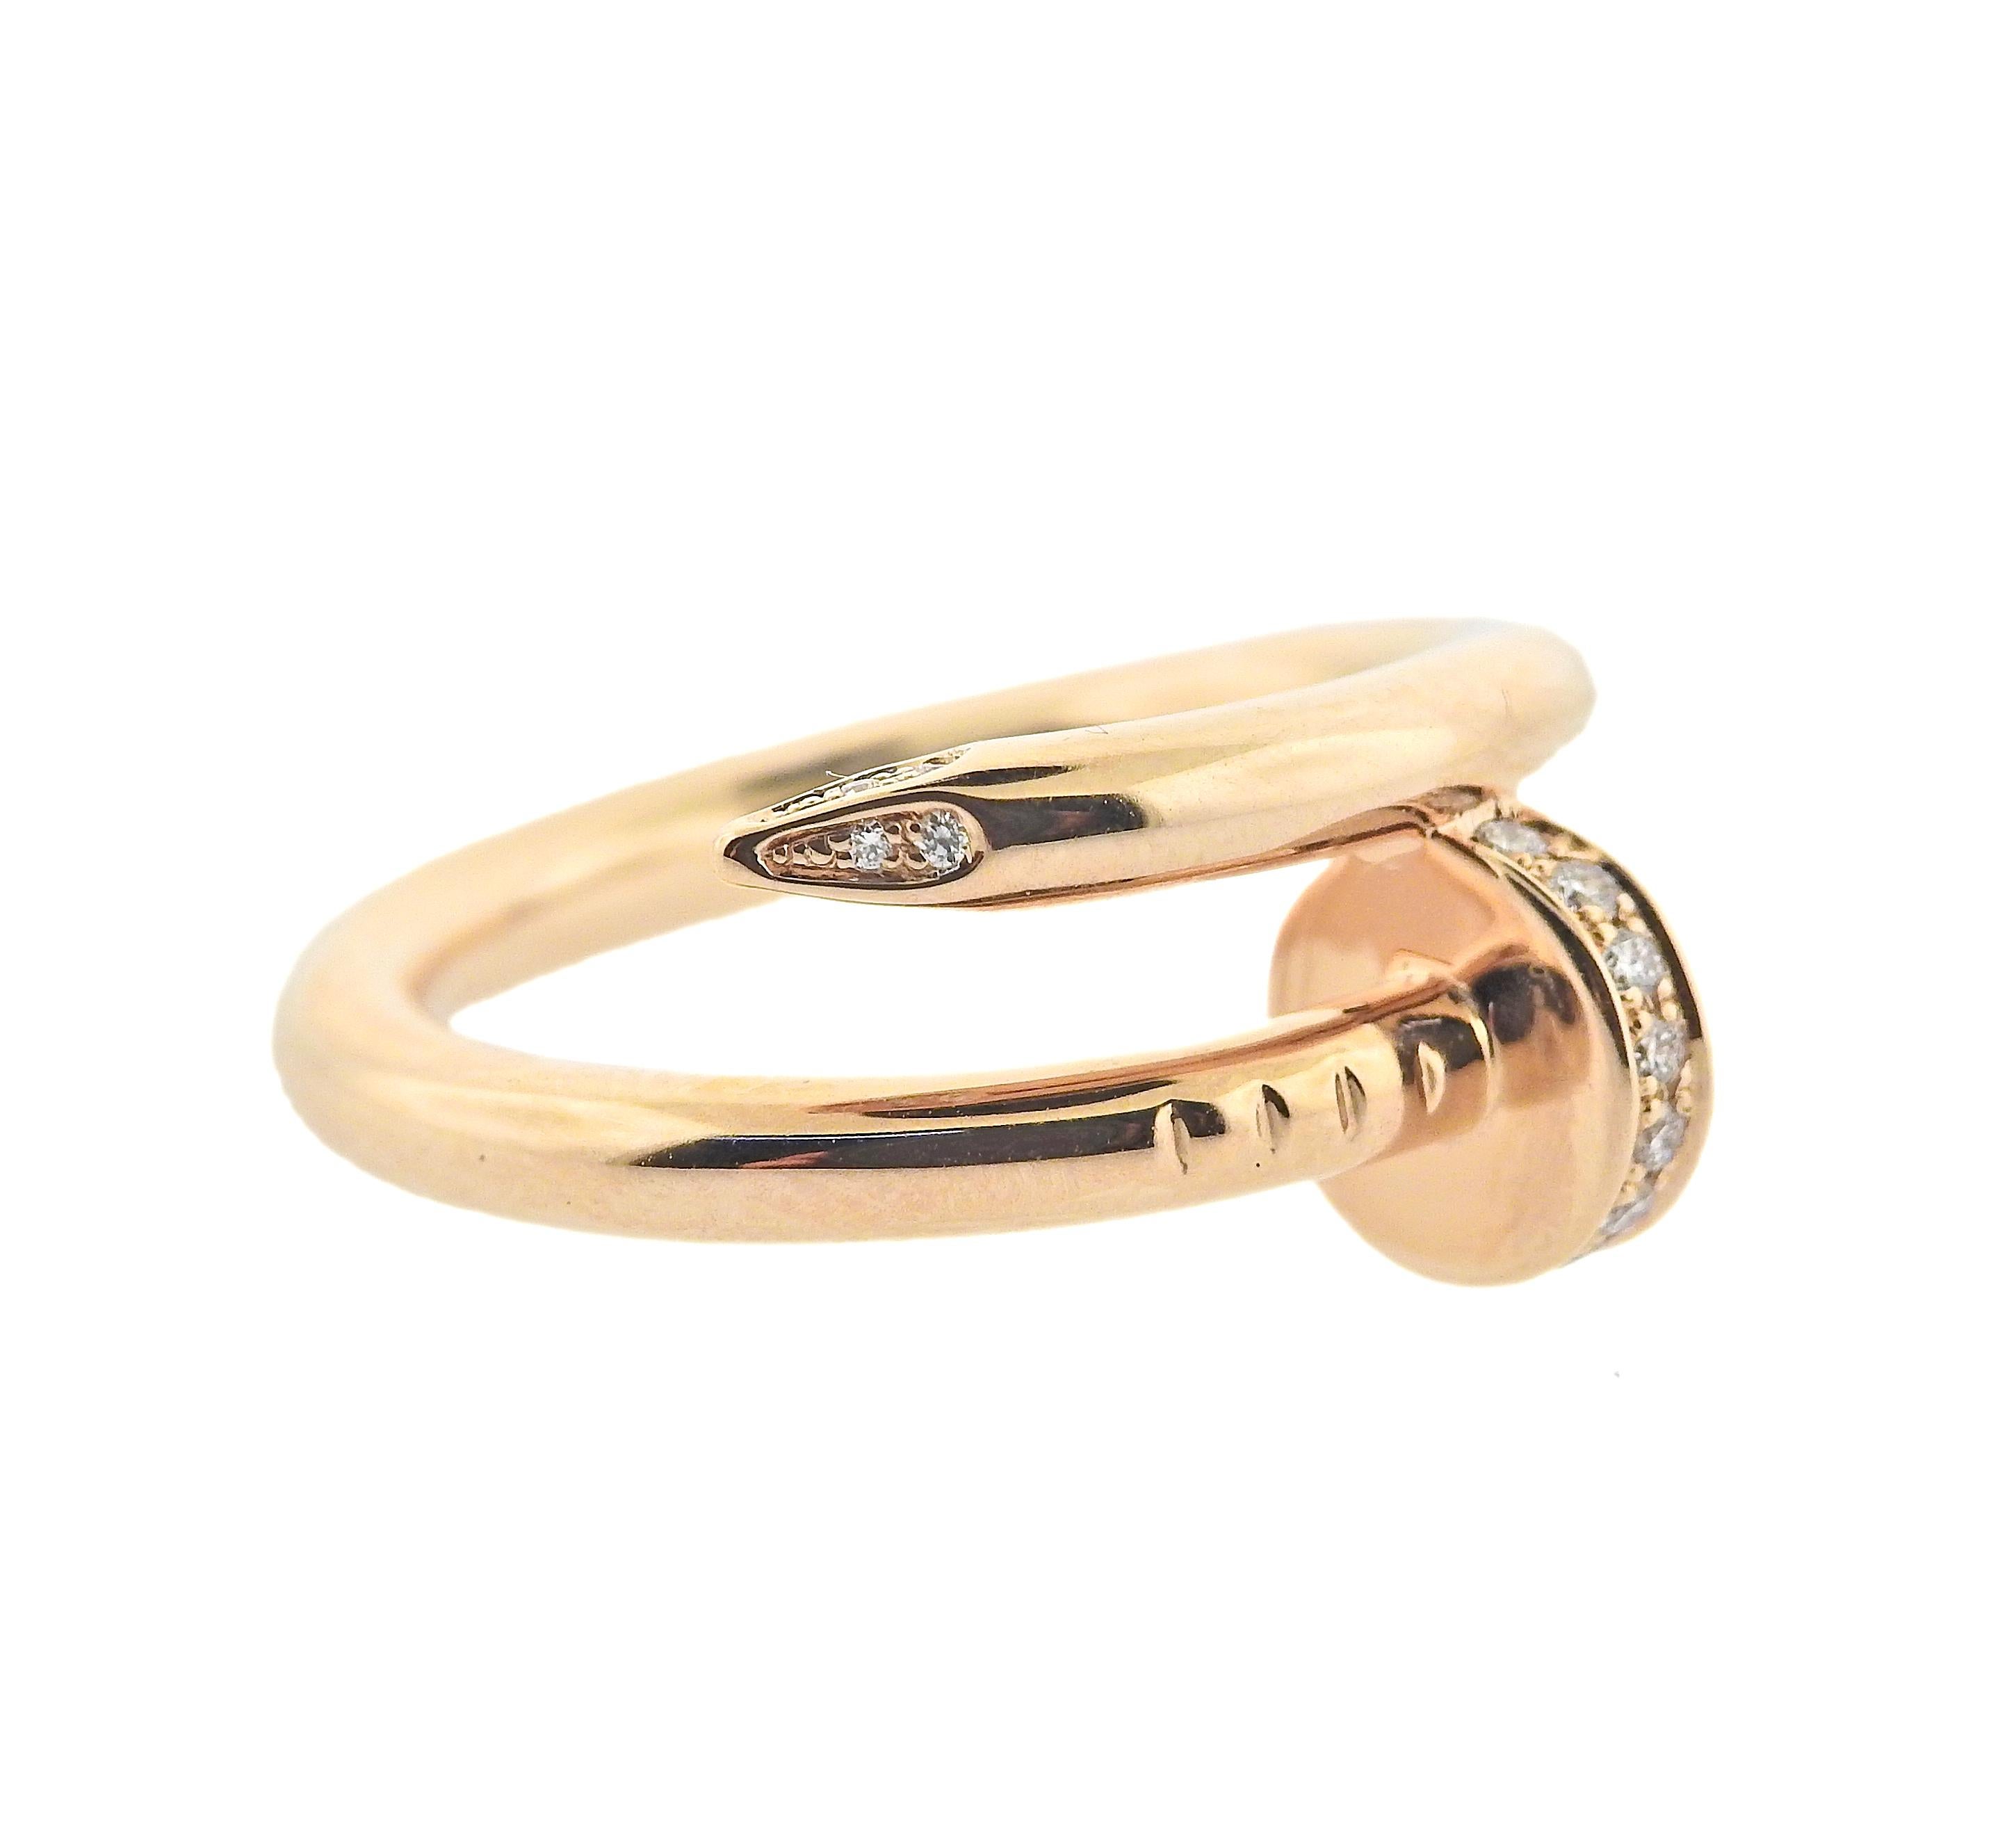 Iconic 18k Rose gold Juste Un Clou nail ring by Cartier, with 0.13ctw G/VS diamonds. Ring comes with COA and box. Retail $4200. Ring size 5.5, ring is 10mm wide. Marked VS15**, Cartier, 750, 51. Weight 7.3 grams.